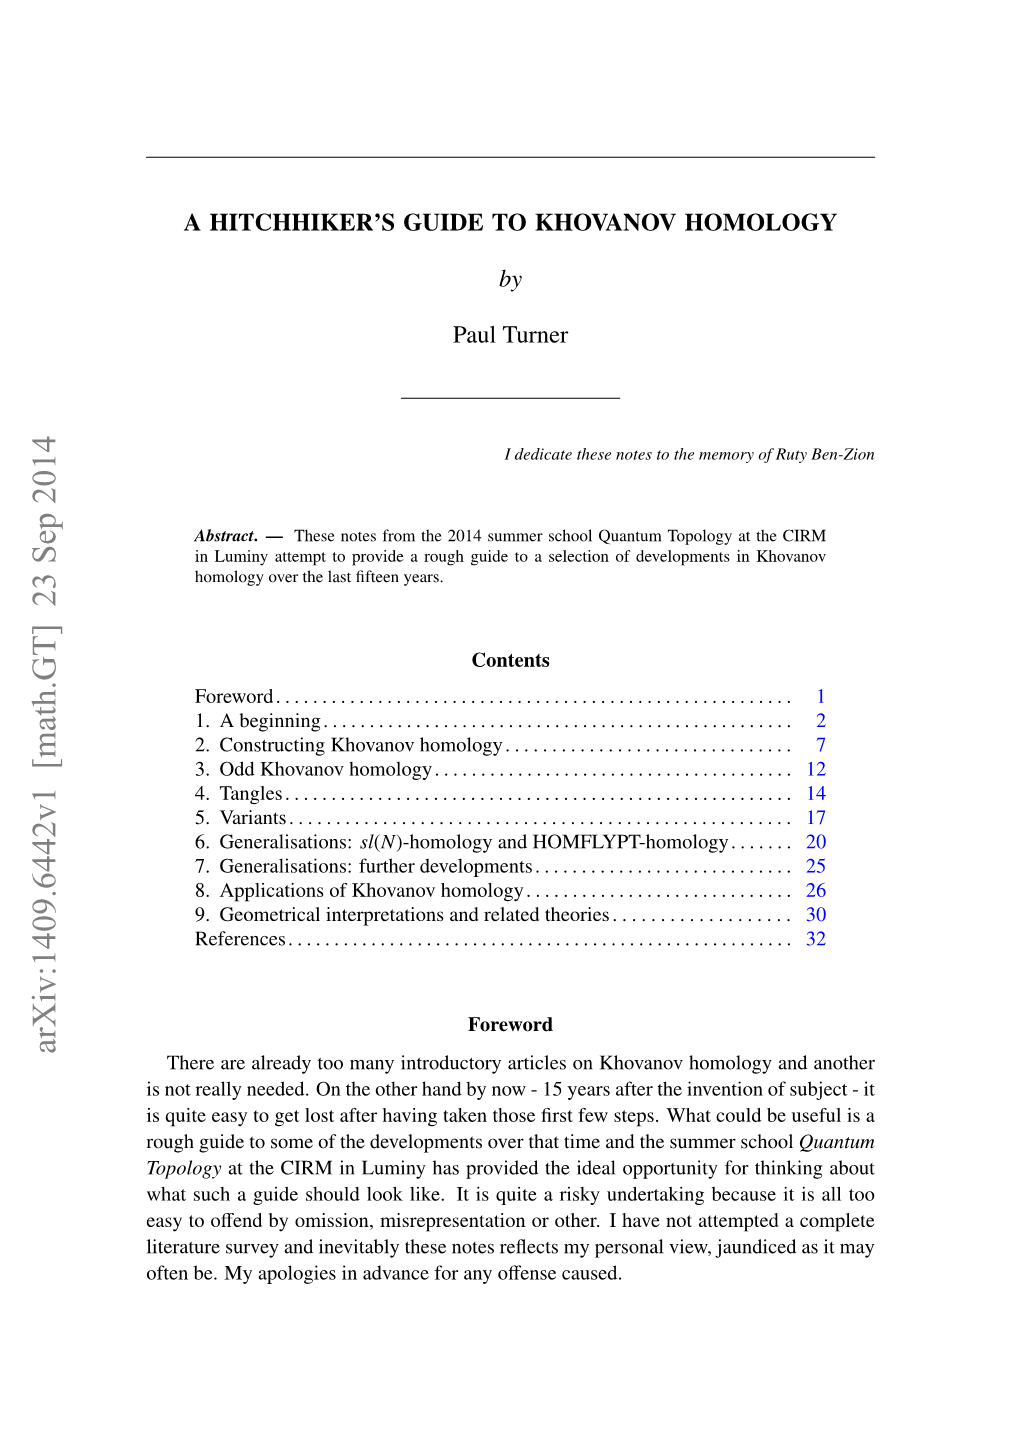 A Hitchhiker's Guide to Khovanov Homology